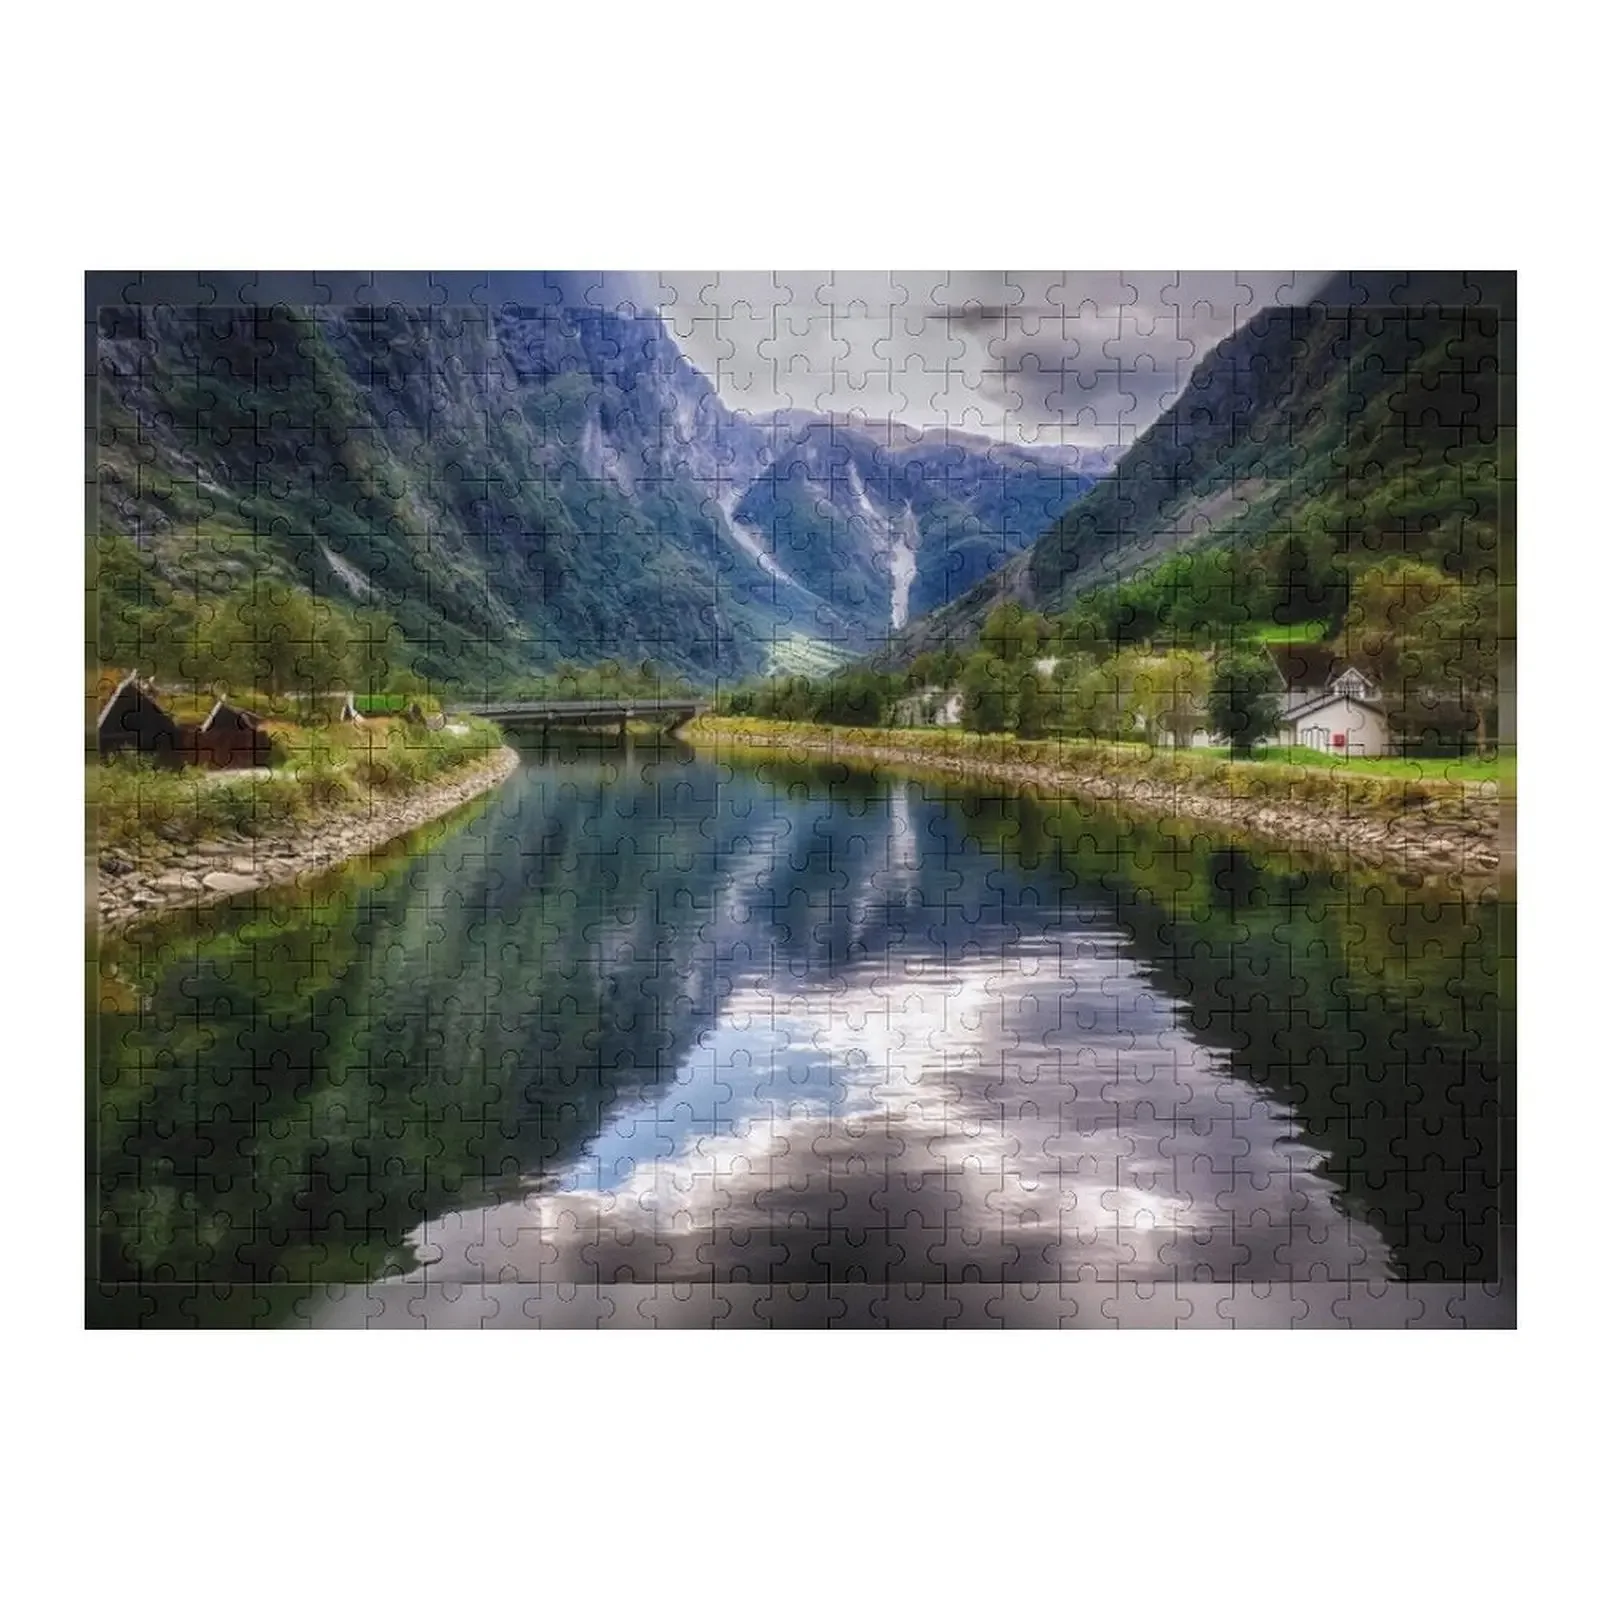 N?r?yfjord - Gudvangen, Norway Jigsaw Puzzle Wooden Adults Personalized Baby Object Puzzle norway